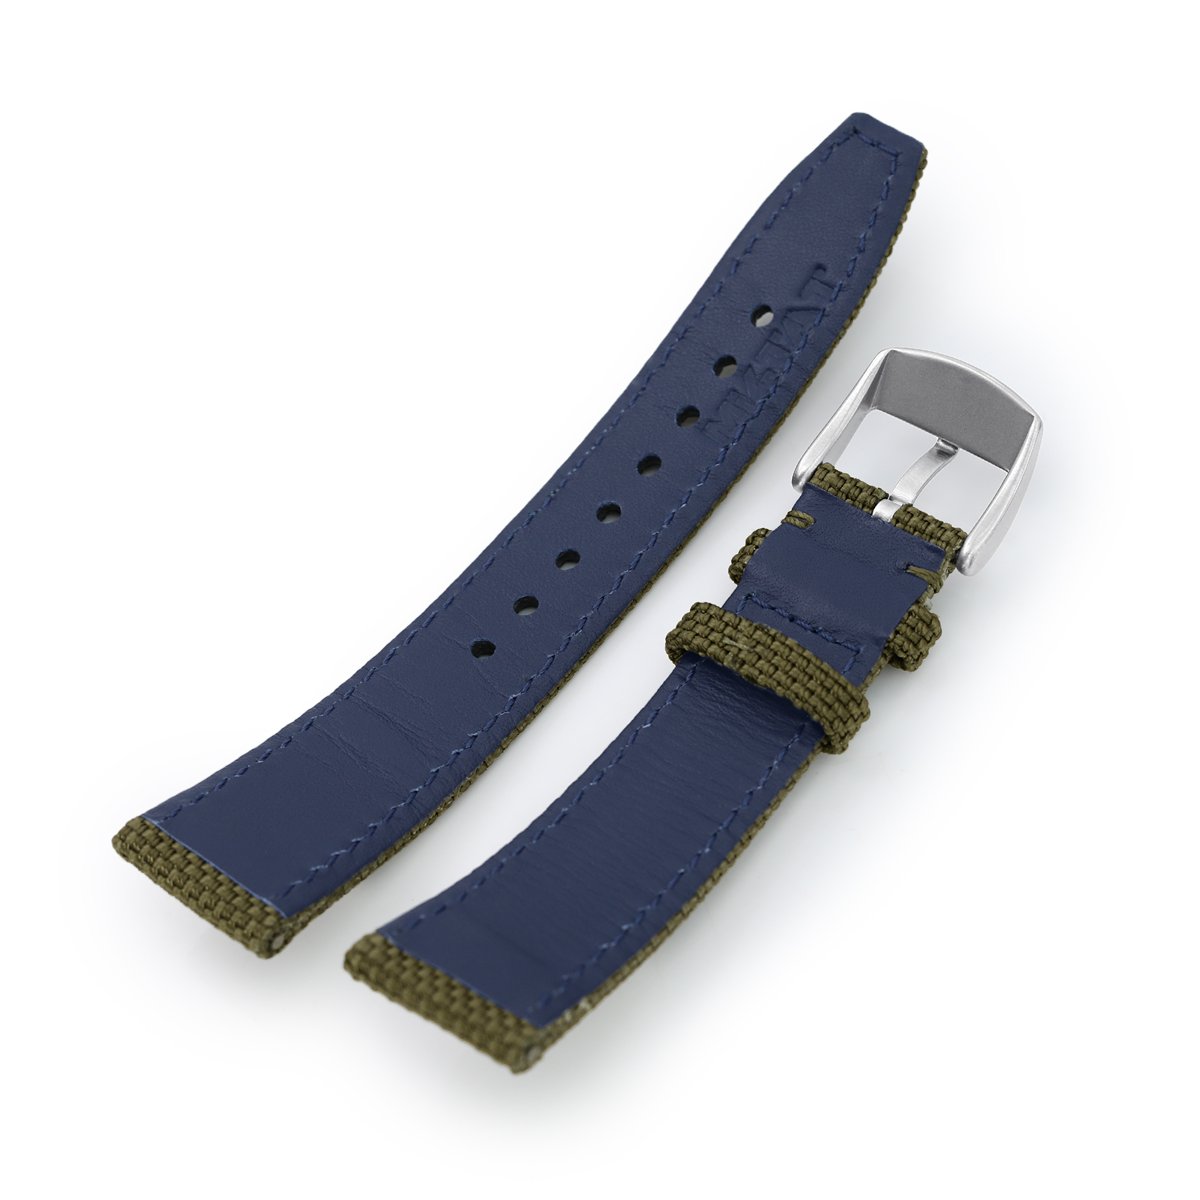 20mm, 21mm or 22mm Strong Texture Woven Nylon Black Watch Strap